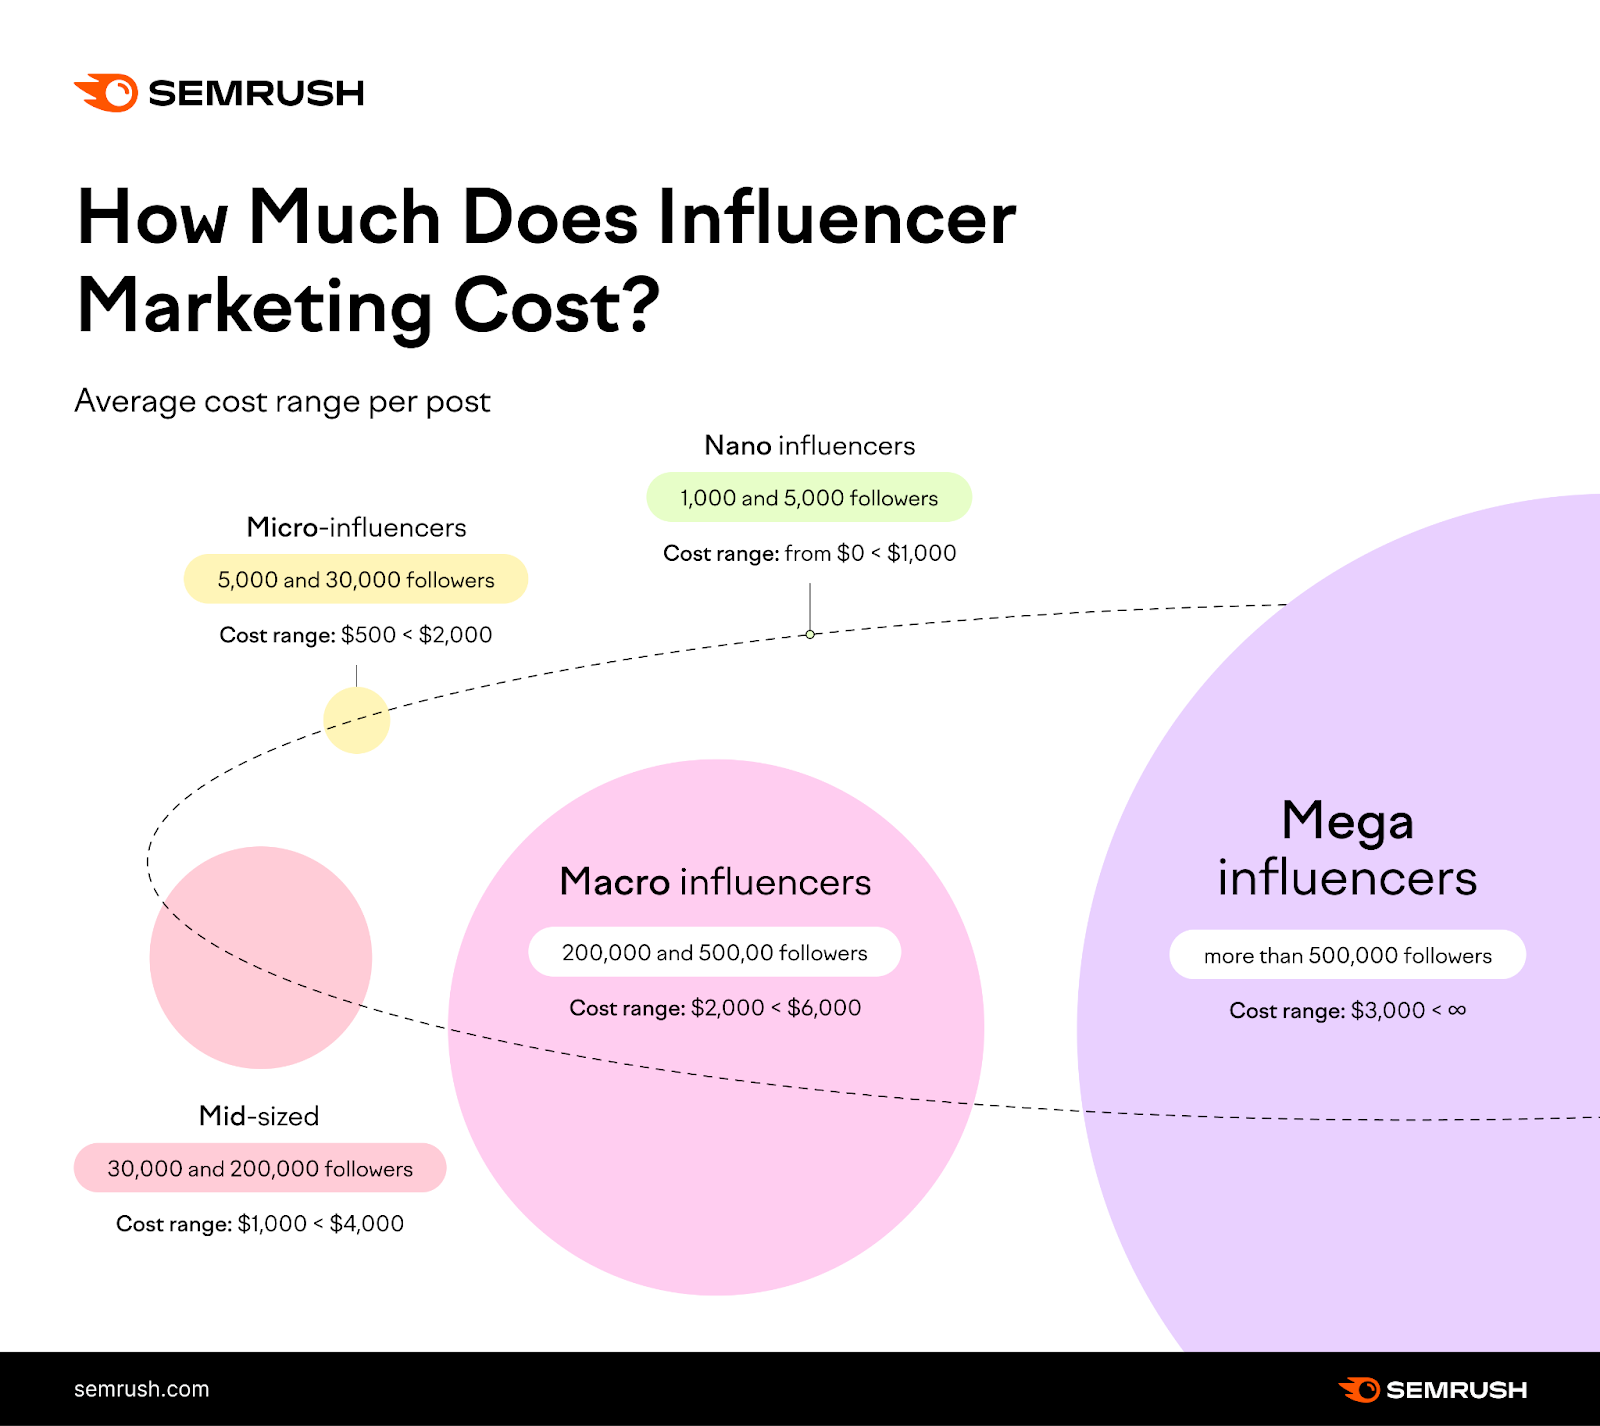 An infographic on how much does influencer marketing cost